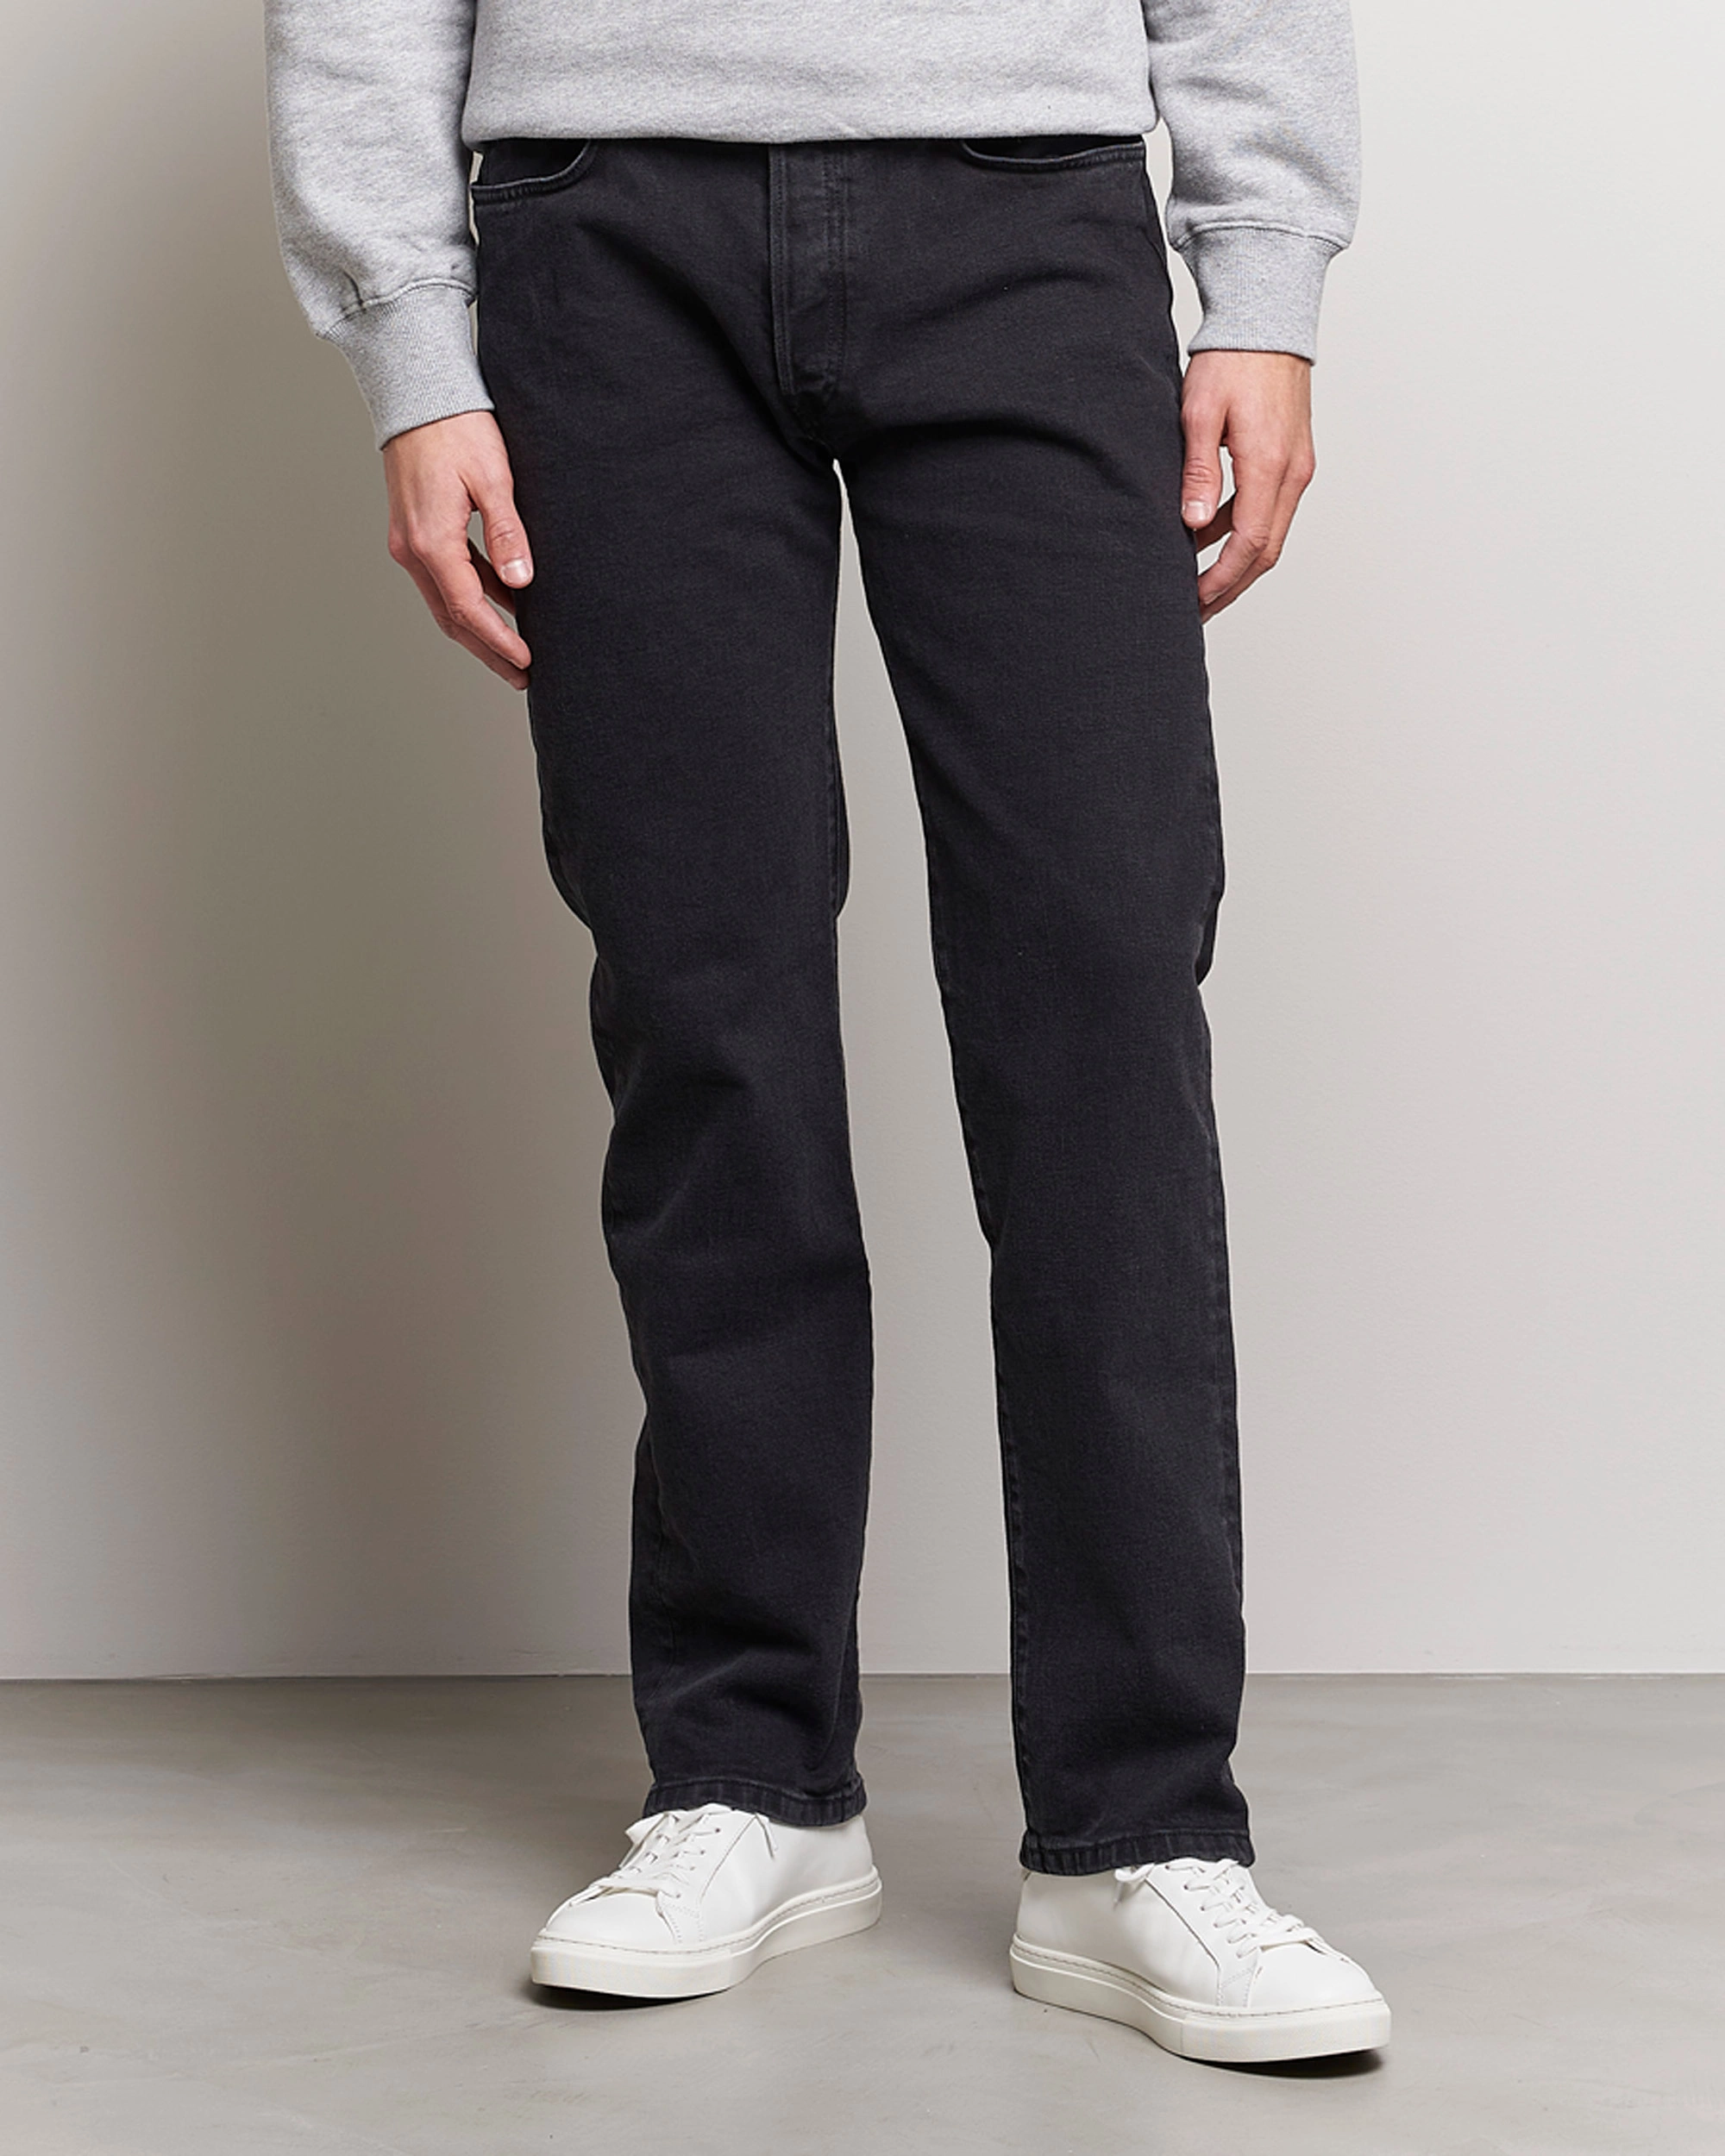 Homme | Straight leg | Jeanerica | CM002 Classic Jeans Black 2 Weeks